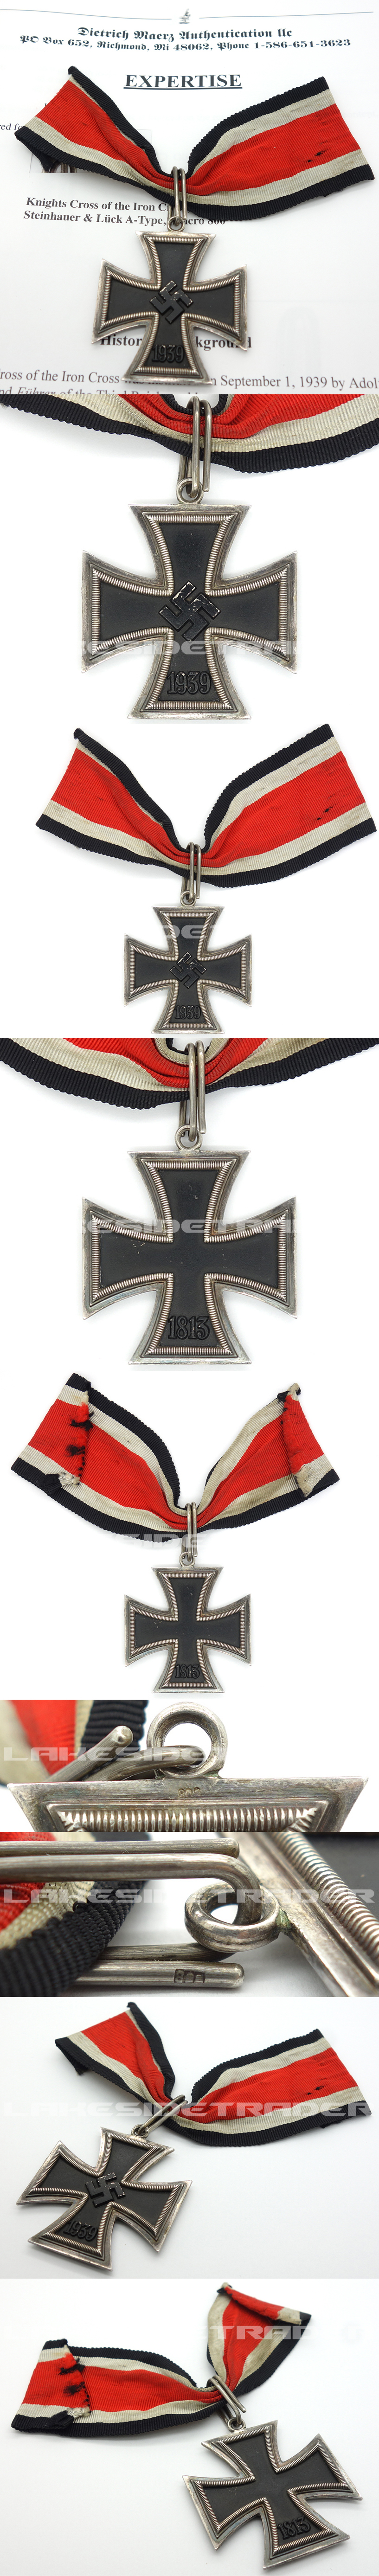 Knights Cross of the Iron Cross by Steinhauer & Lück with COA